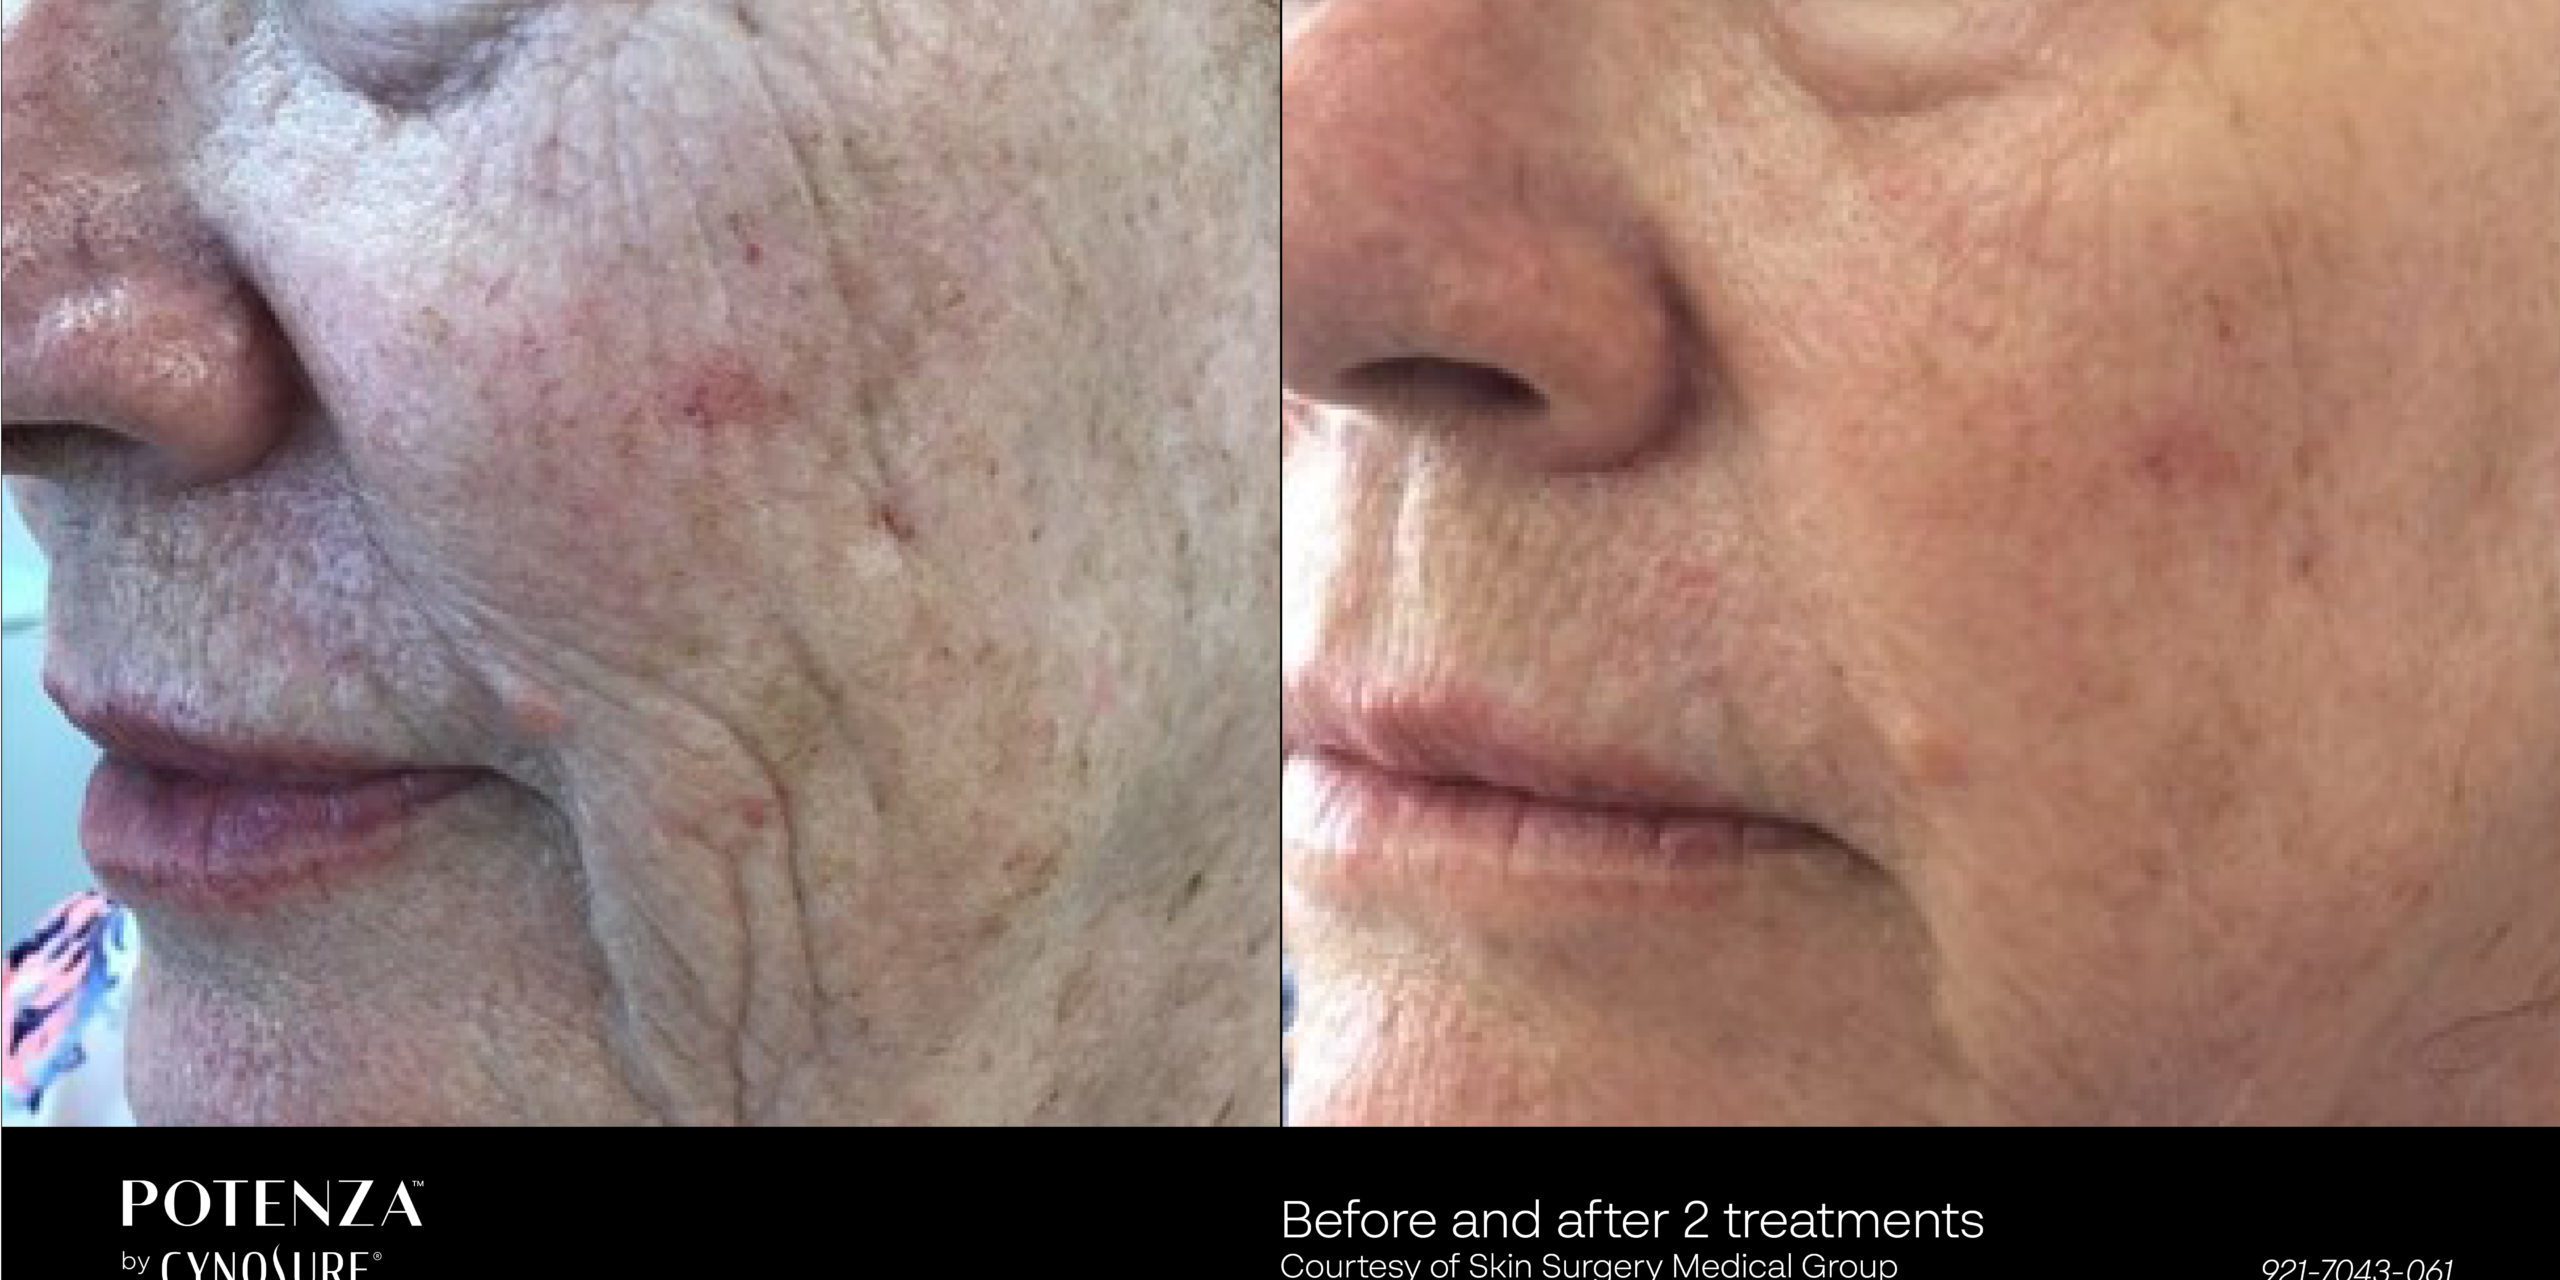 Potenza Radiofrequency Microneedling Before and After